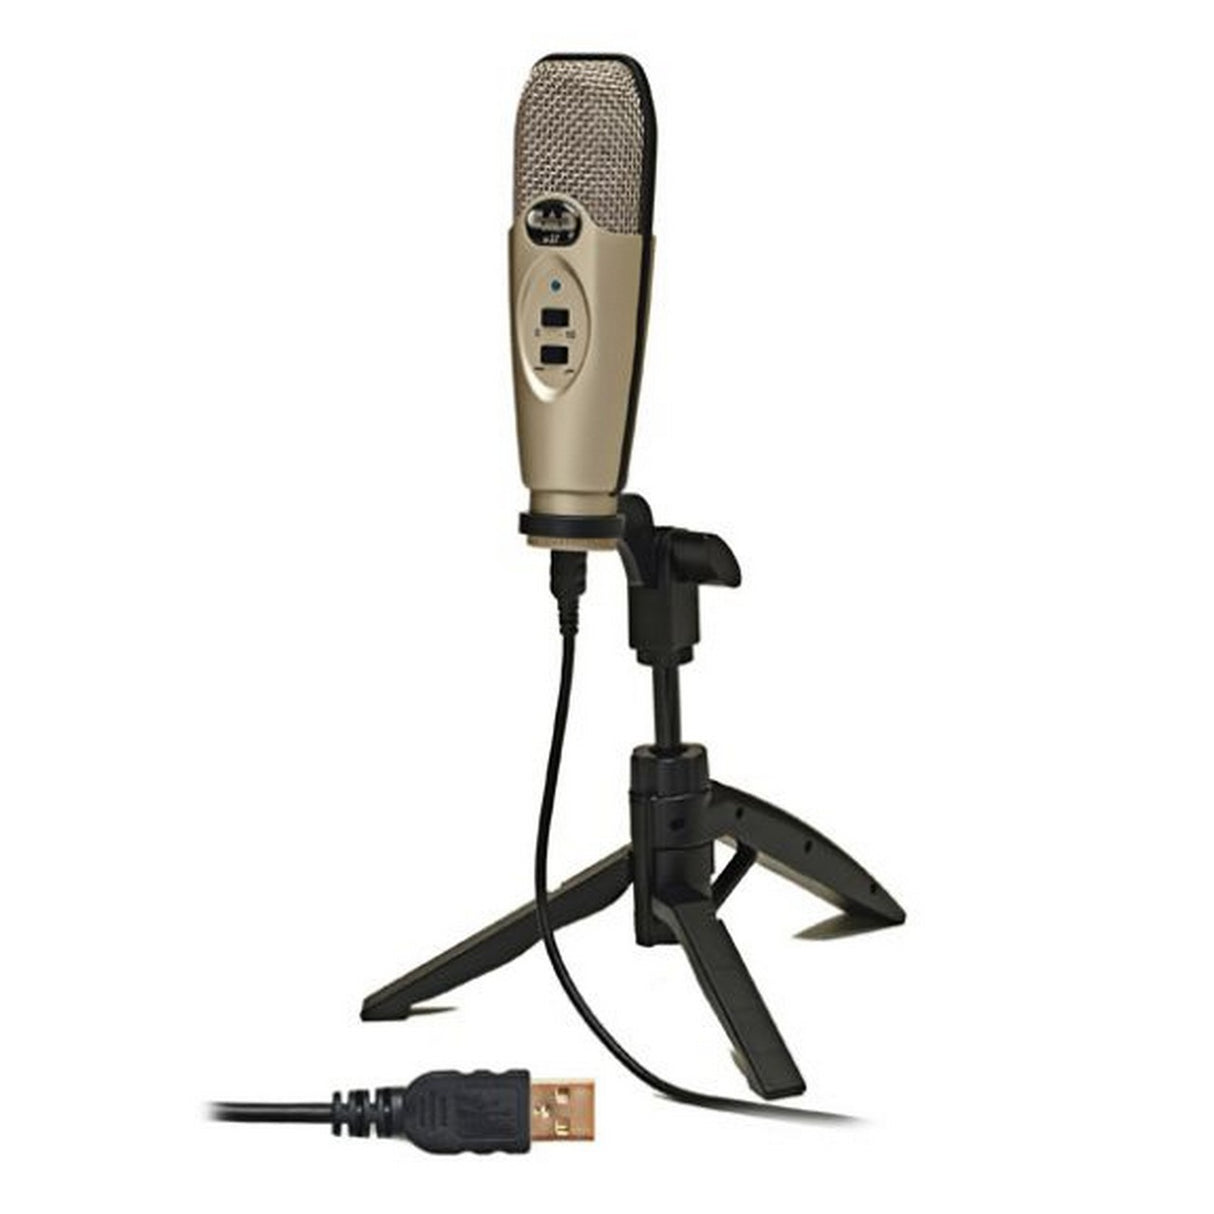 CAD Audio U37 USB Large Diaphragm Cardioid Condenser Microphone with Tripod Stand